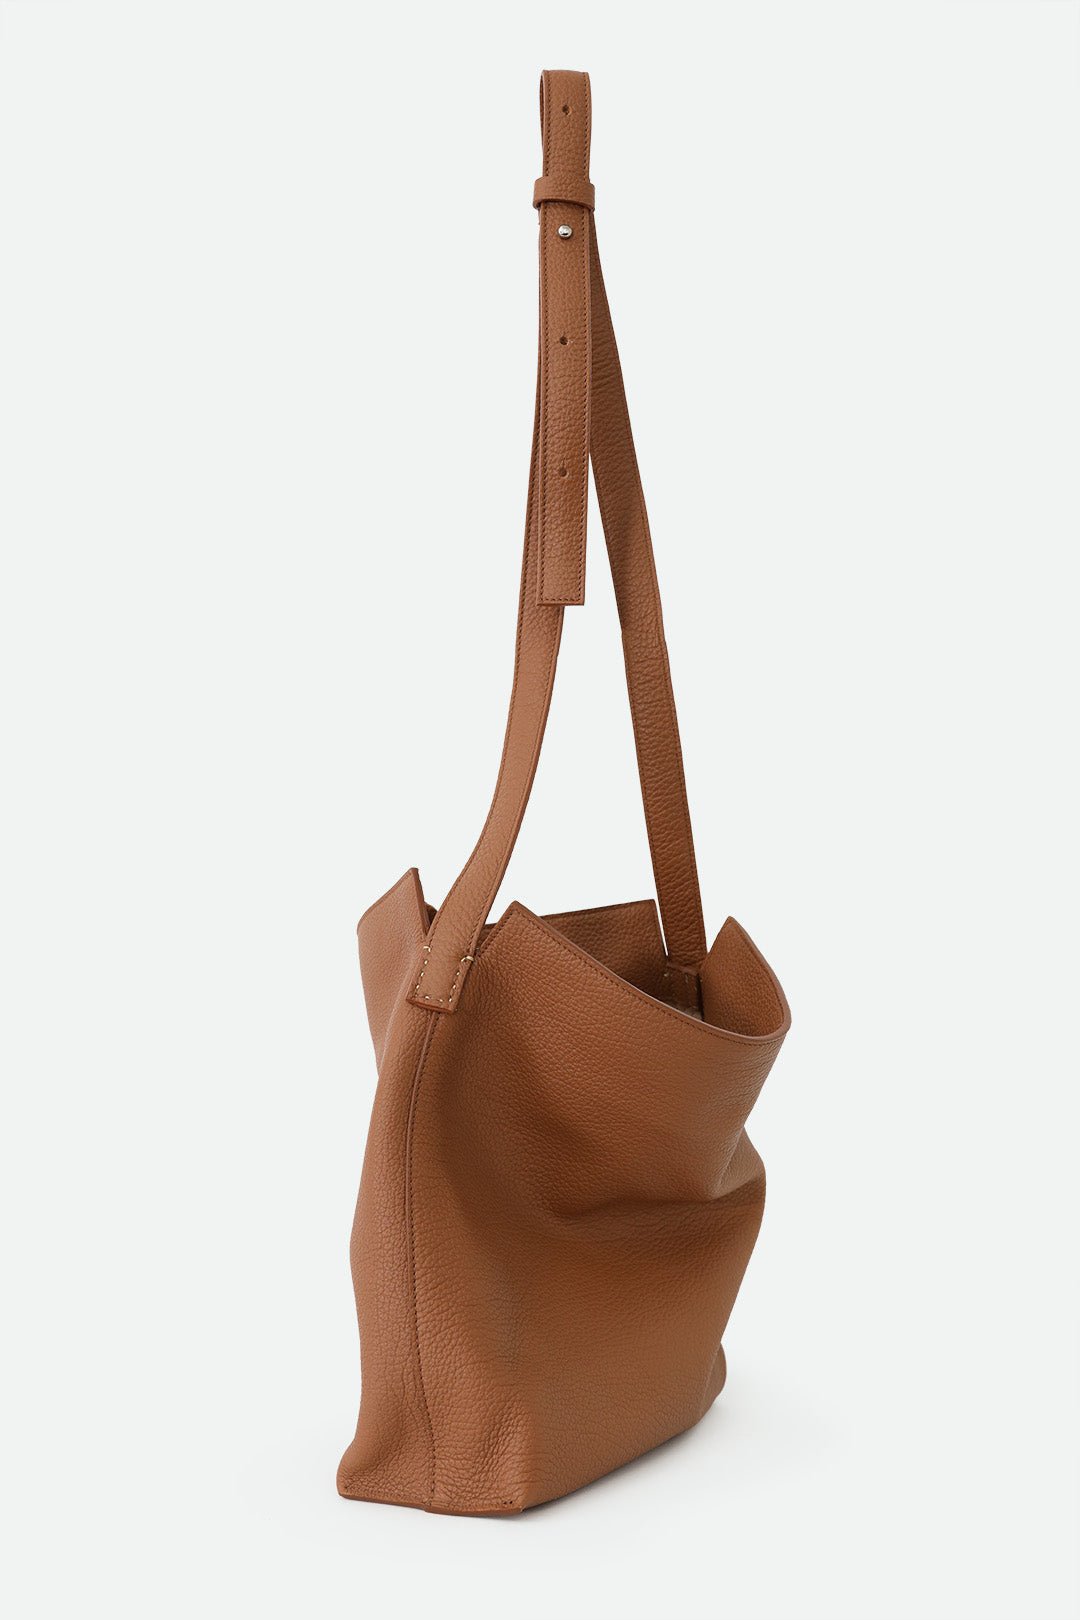 VINCENZA ITALIAN LEATHER BUCKET BAG NATURAL CUOIO - Jarbo